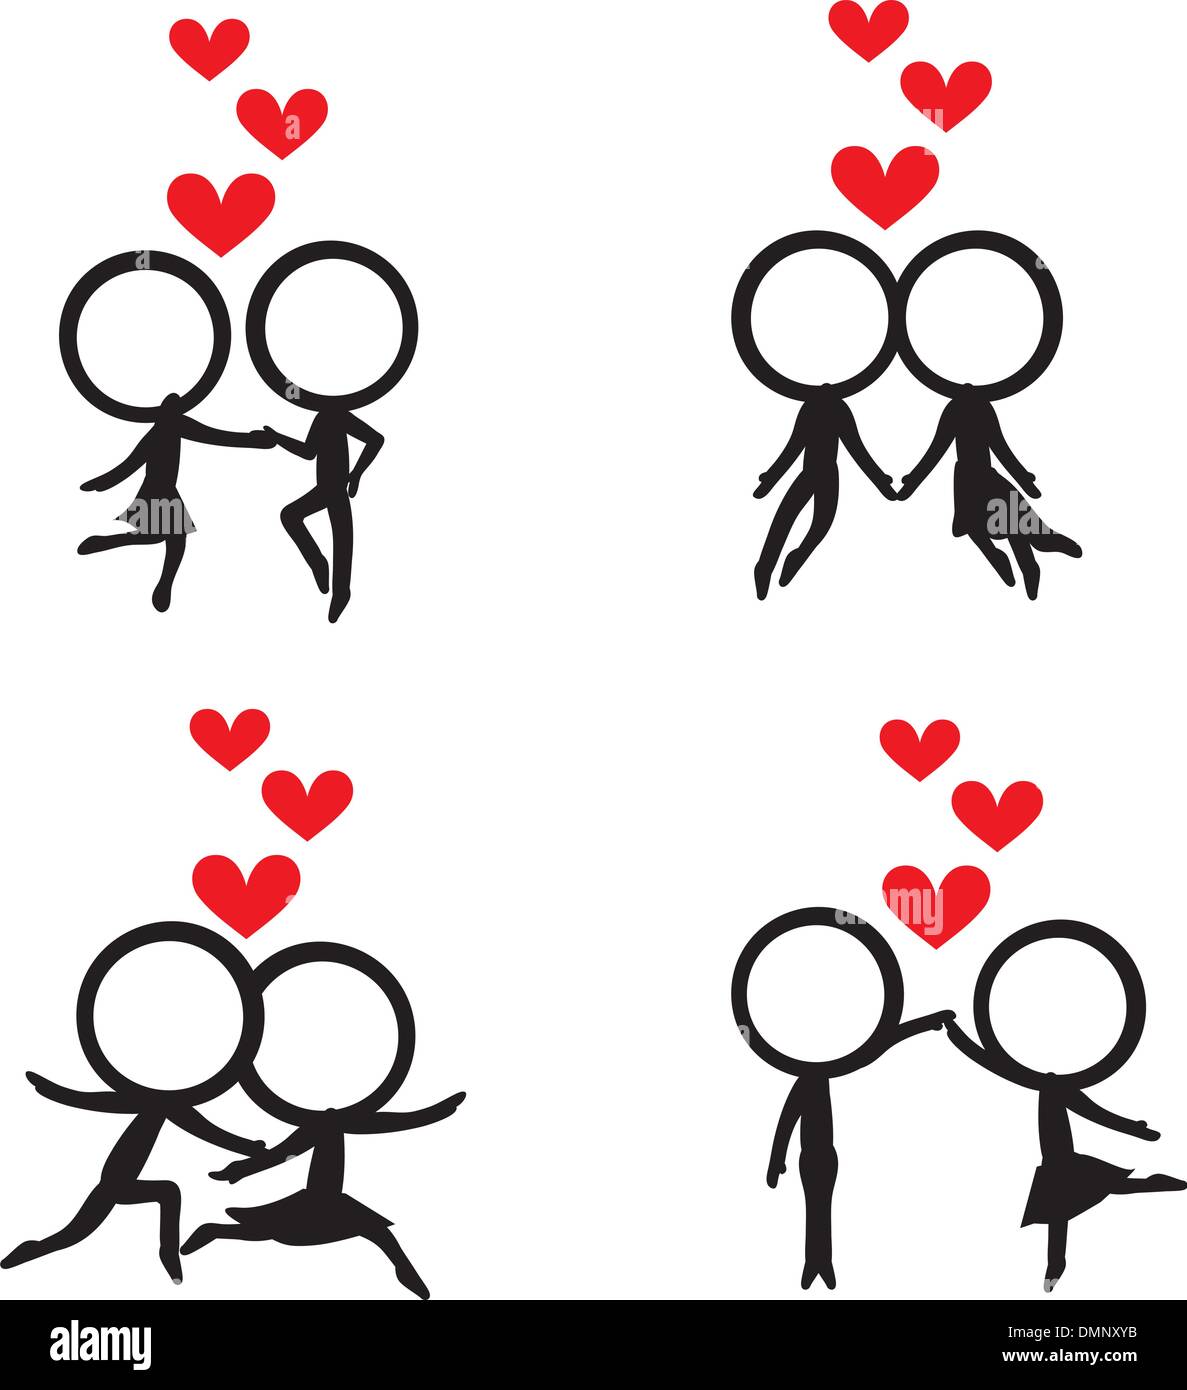 12 Easy Stick Figures in Different Poses